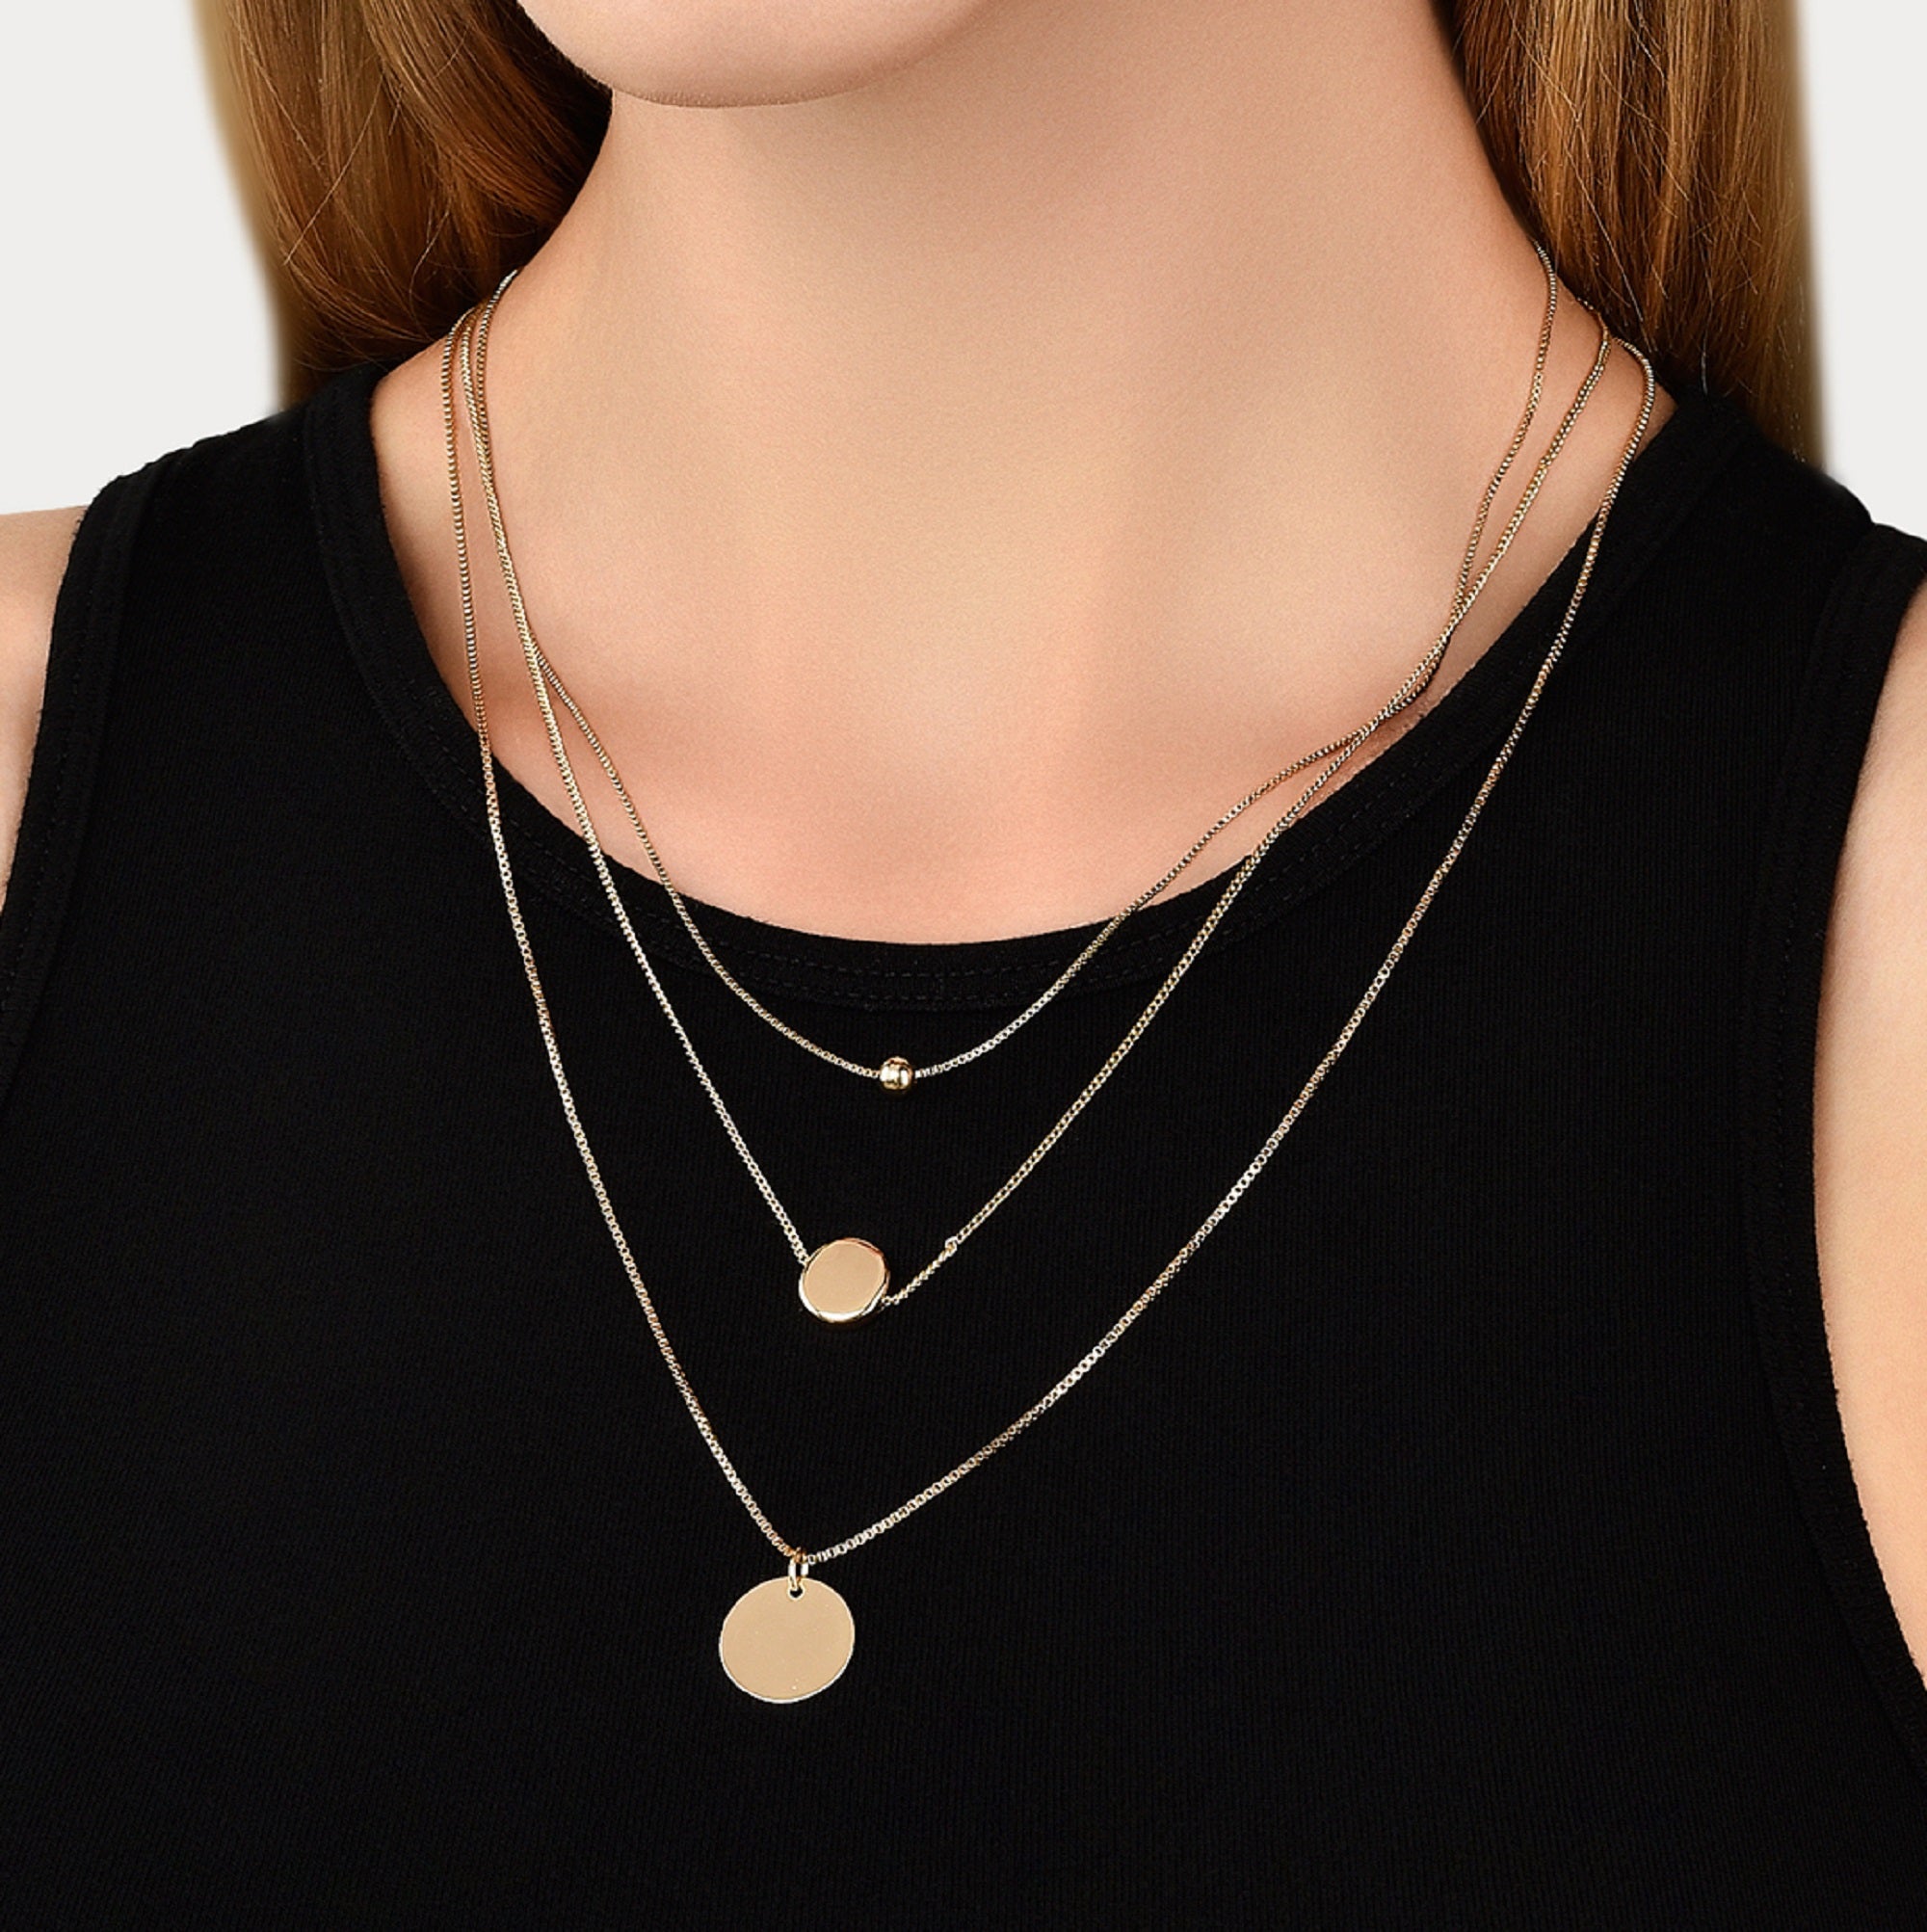 Gold Tiny Hammered Disc Necklace - All The Falling Stars